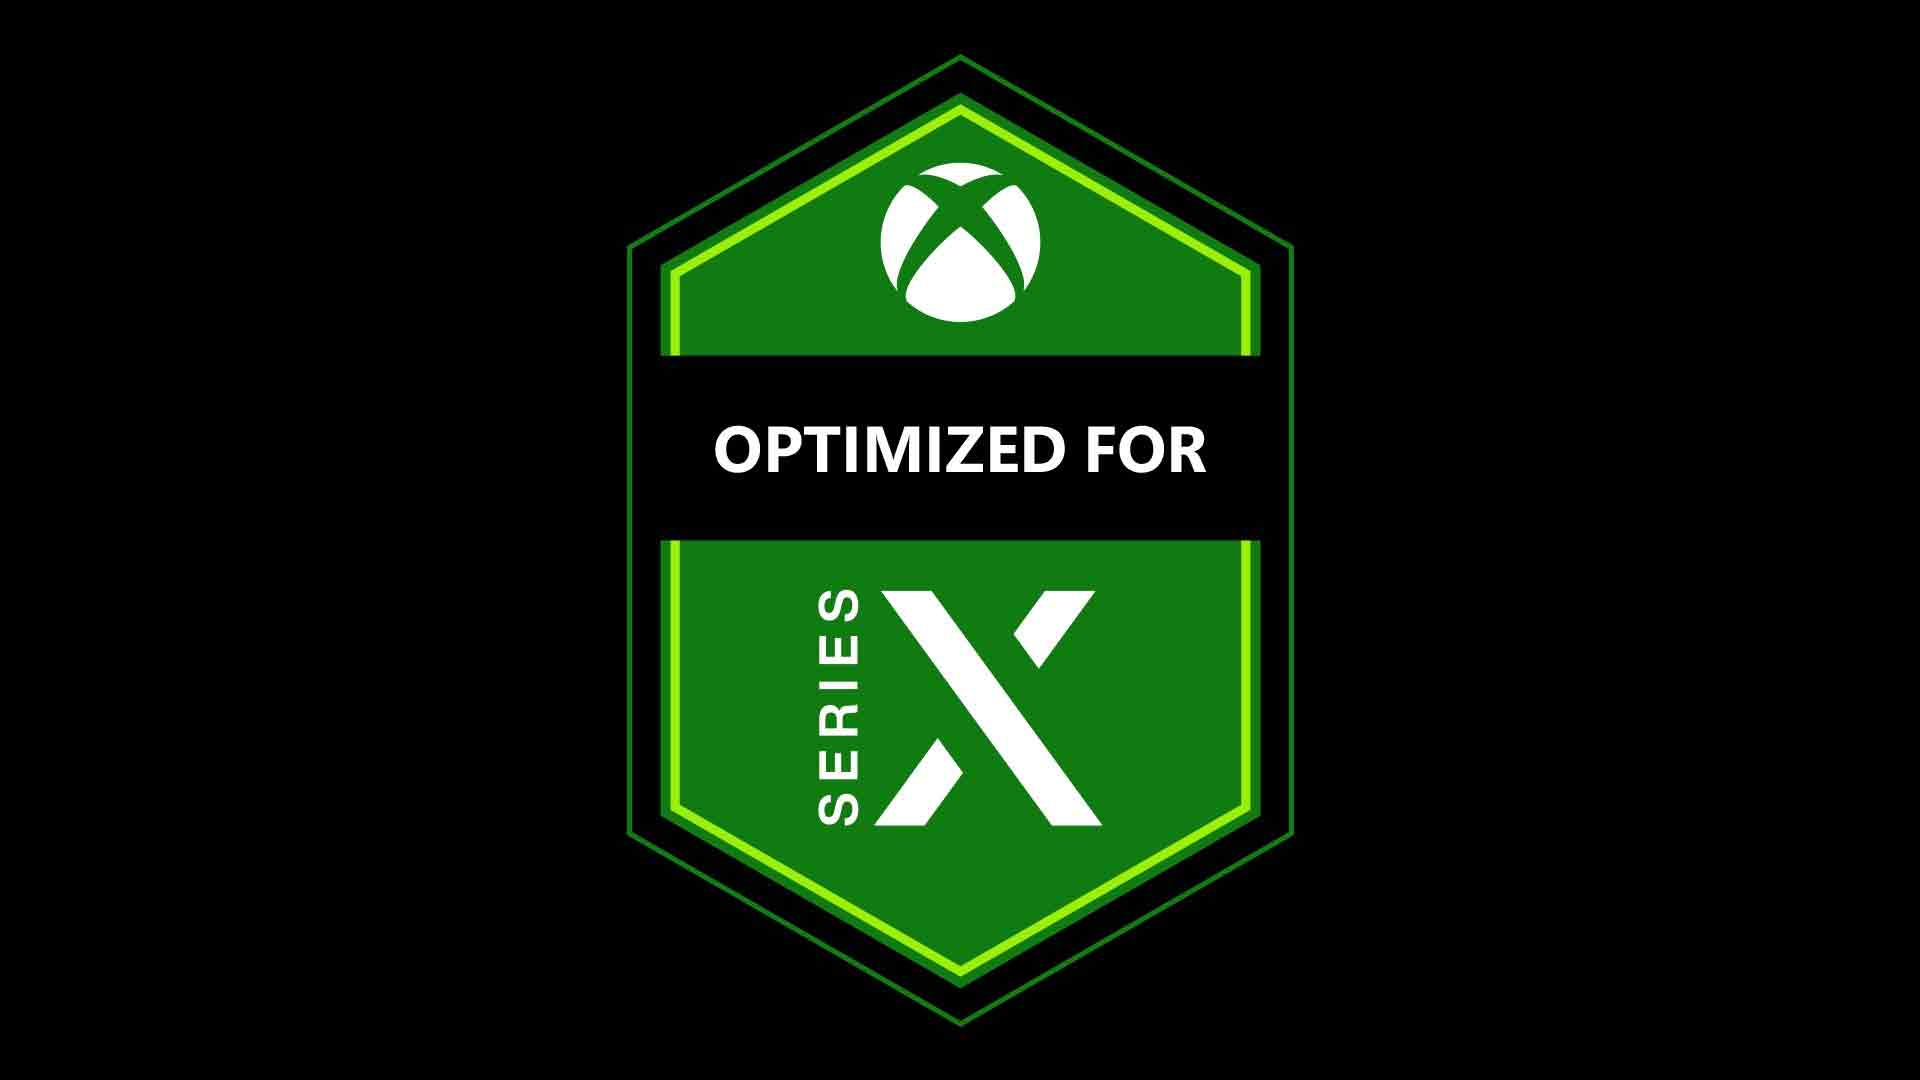 Xbox Series X Optimized meaning